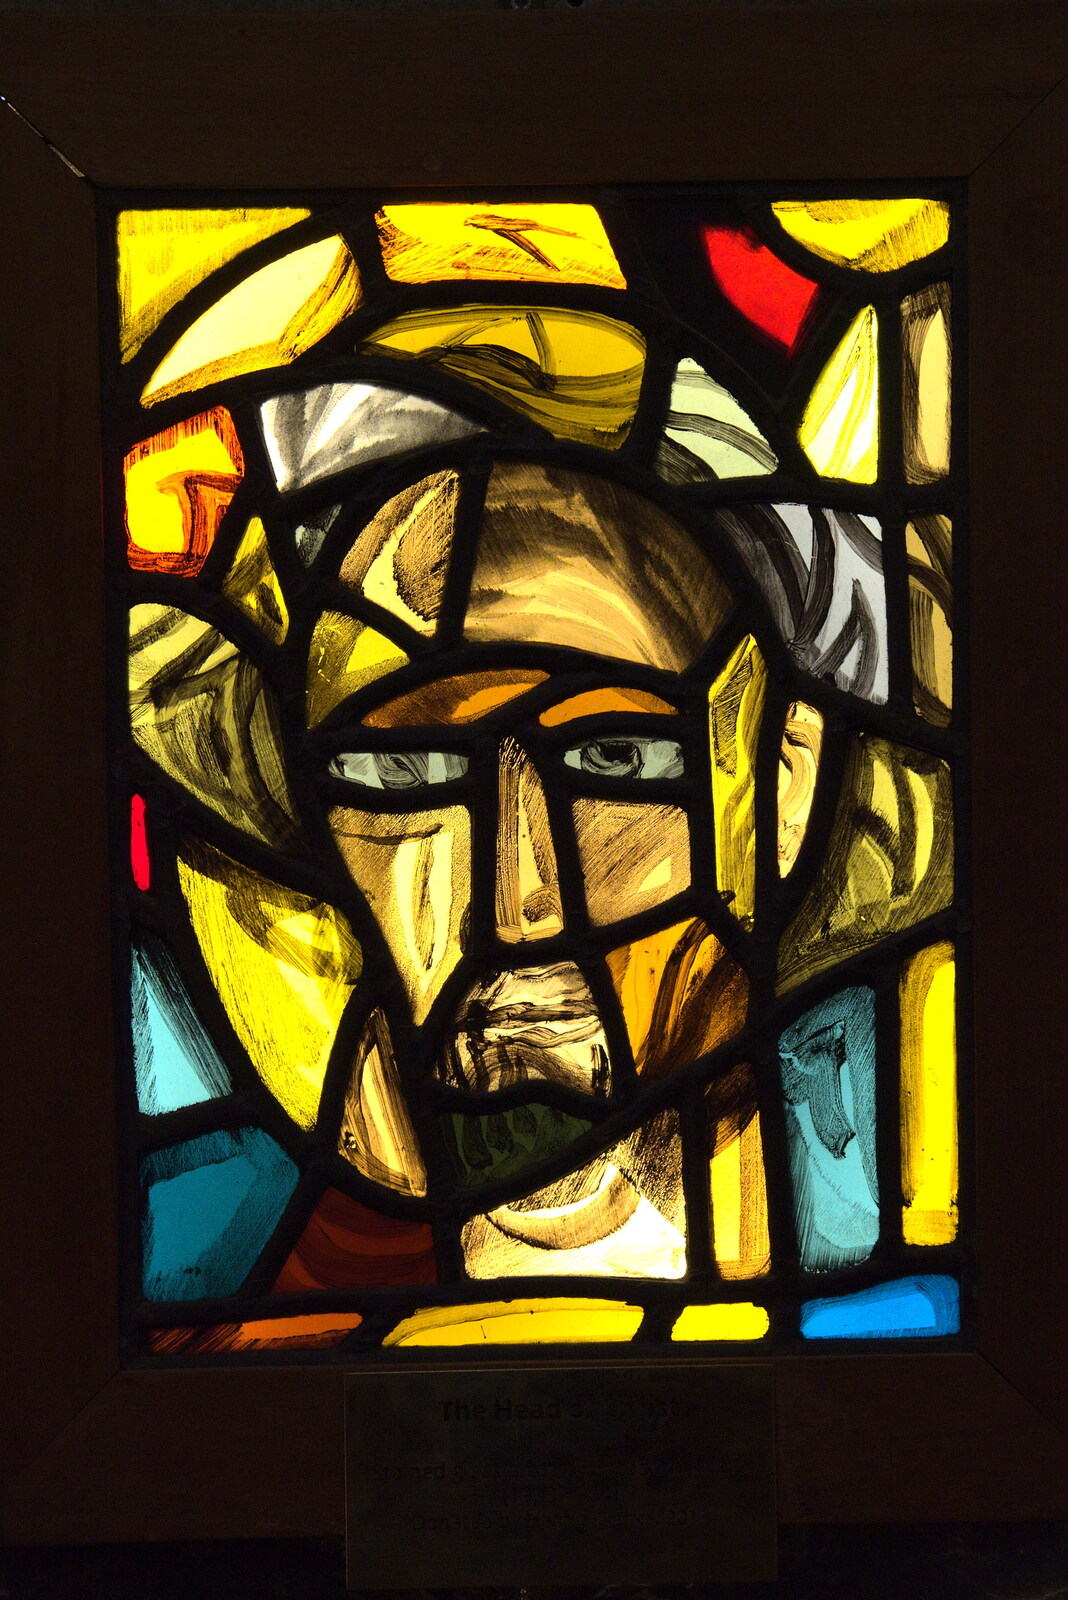 Modern stained glass Jesus from A Trip to Noddy's, and Dublin City Centre, Wicklow and Dublin, Ireland - 16th August 2021